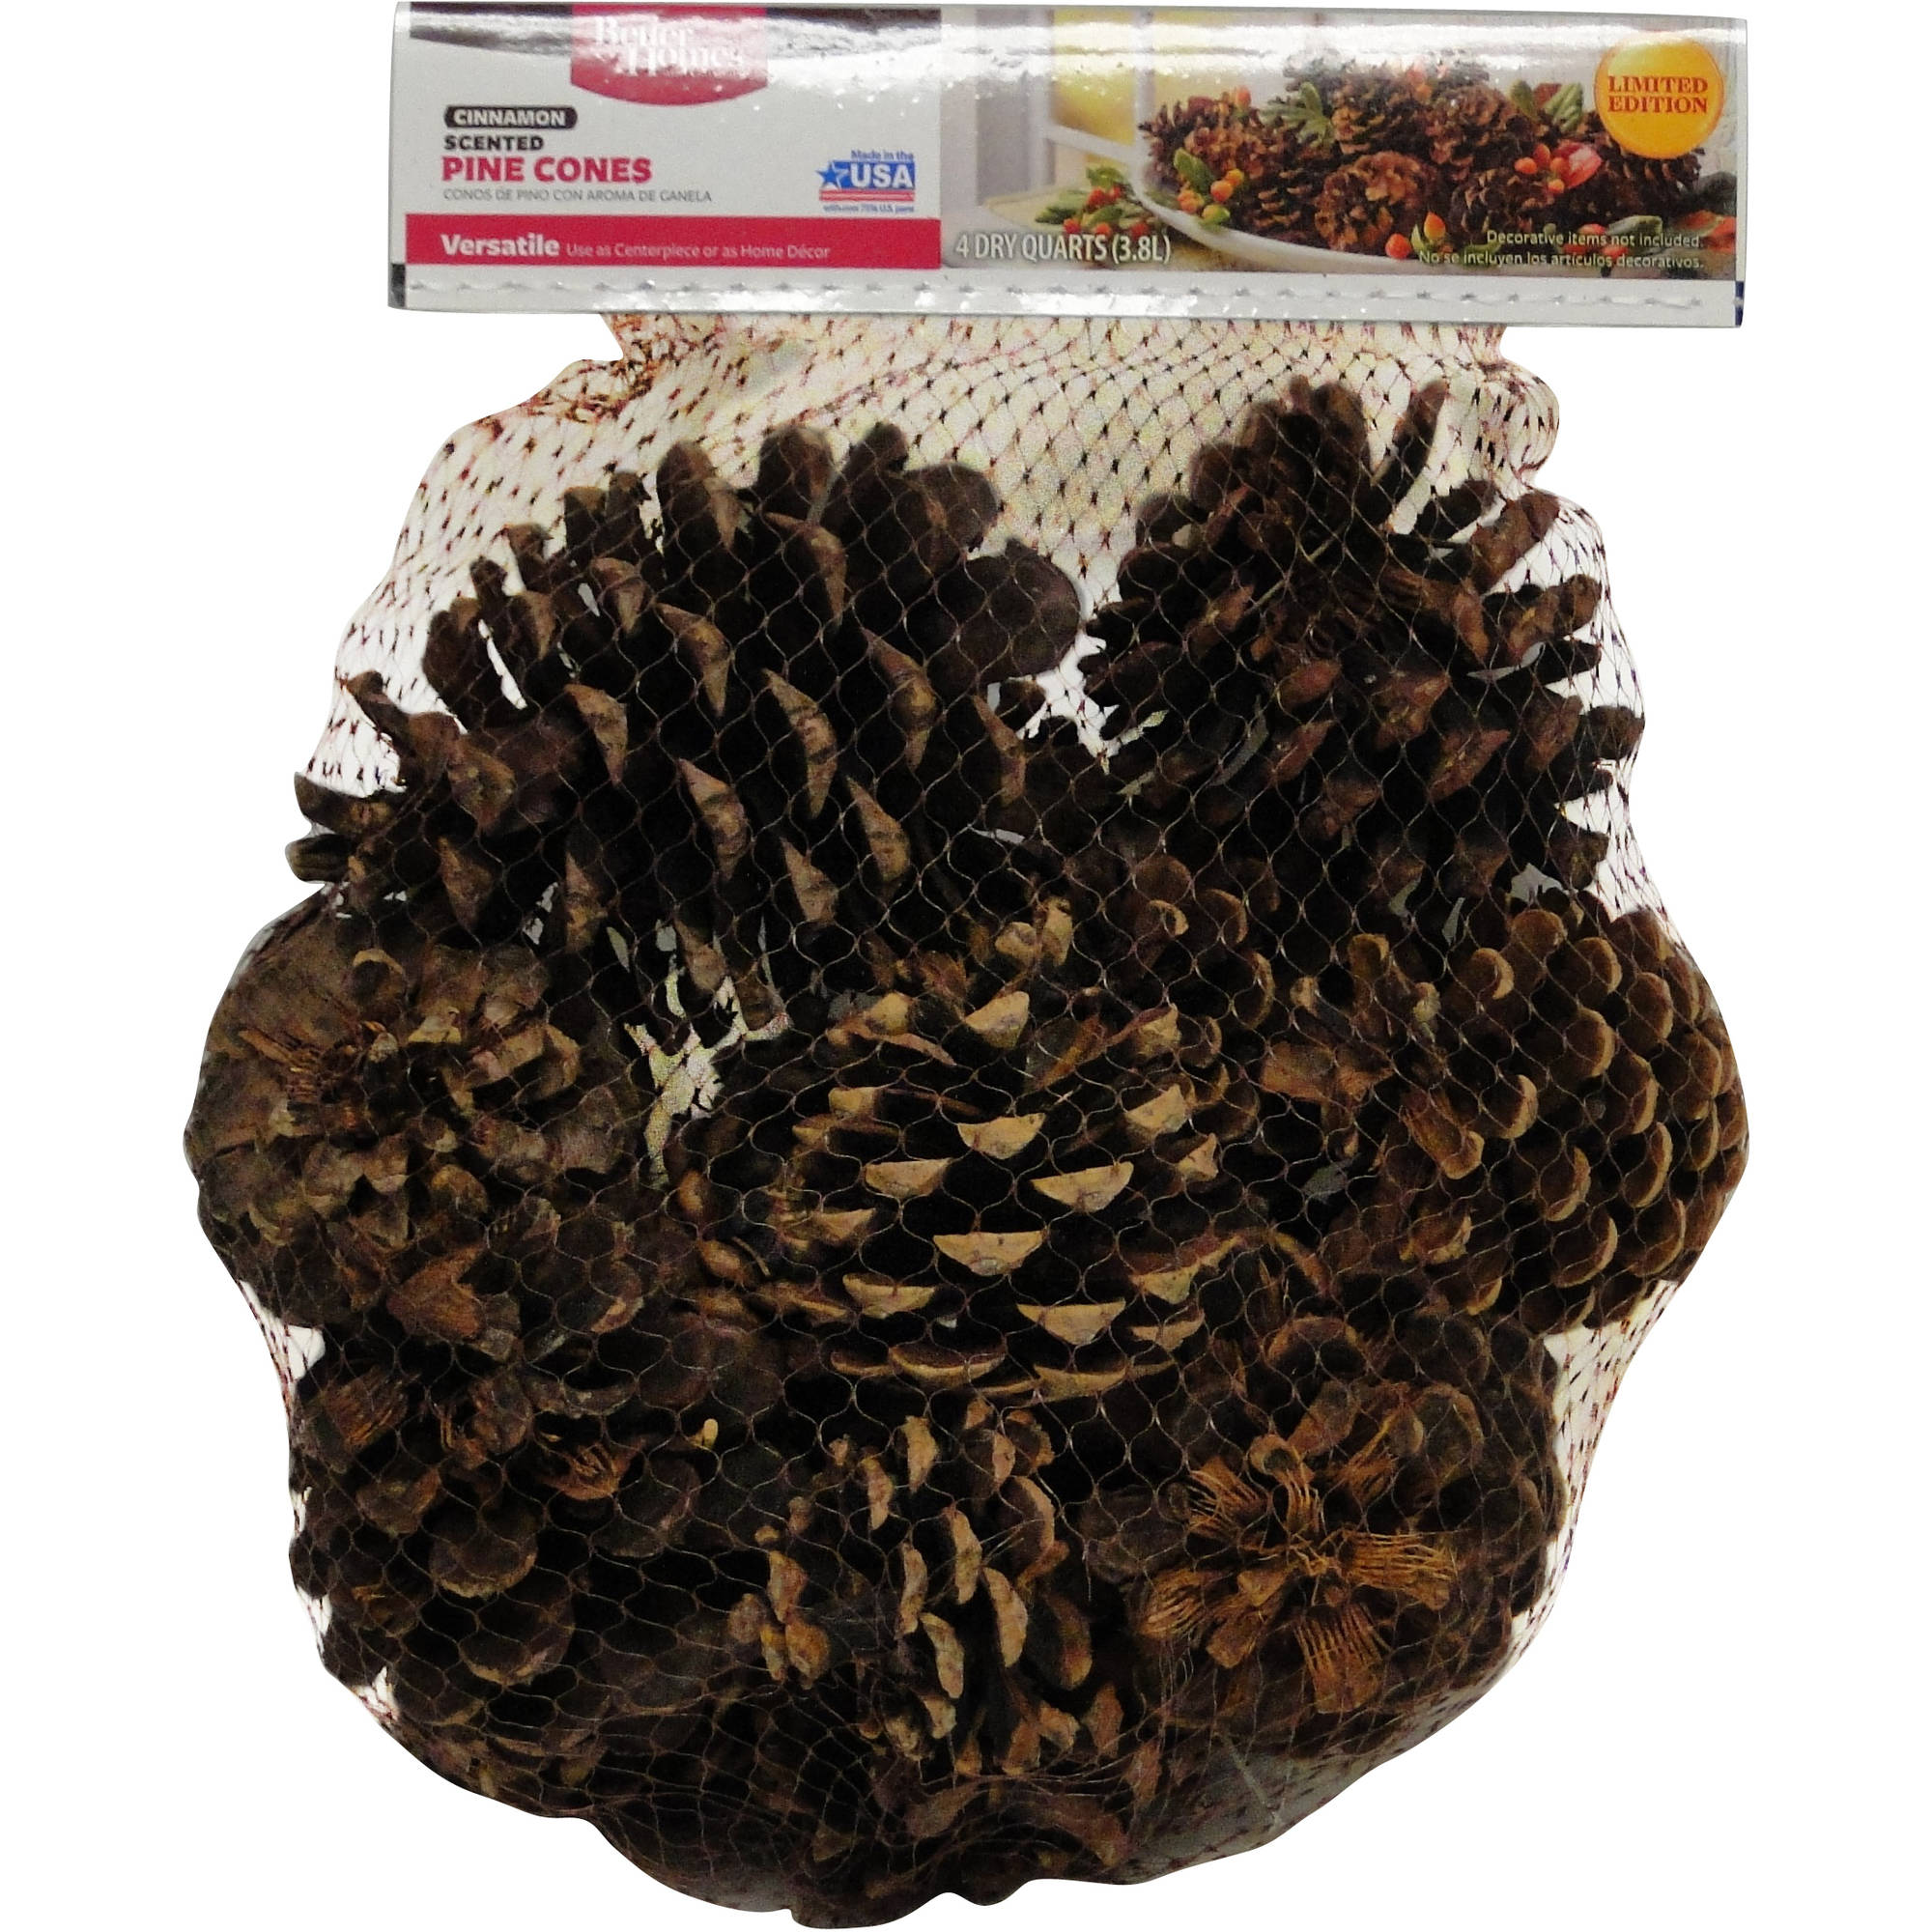 Better Homes and Gardens Large Cinnamon-Scented Pine Cones - Walmart.com